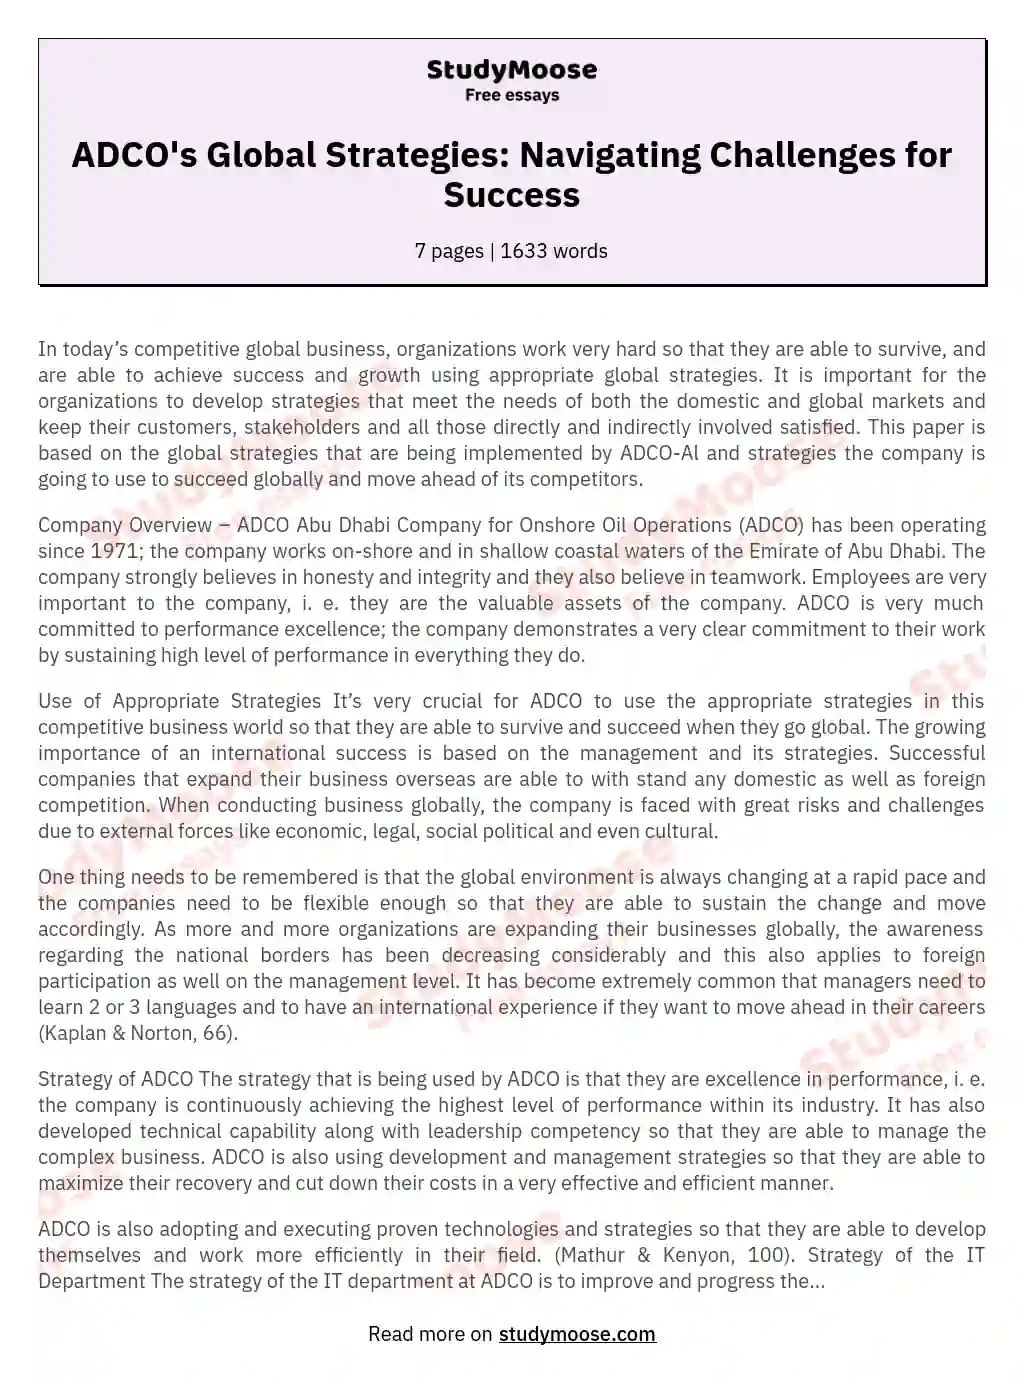 ADCO's Global Strategies: Navigating Challenges for Success essay